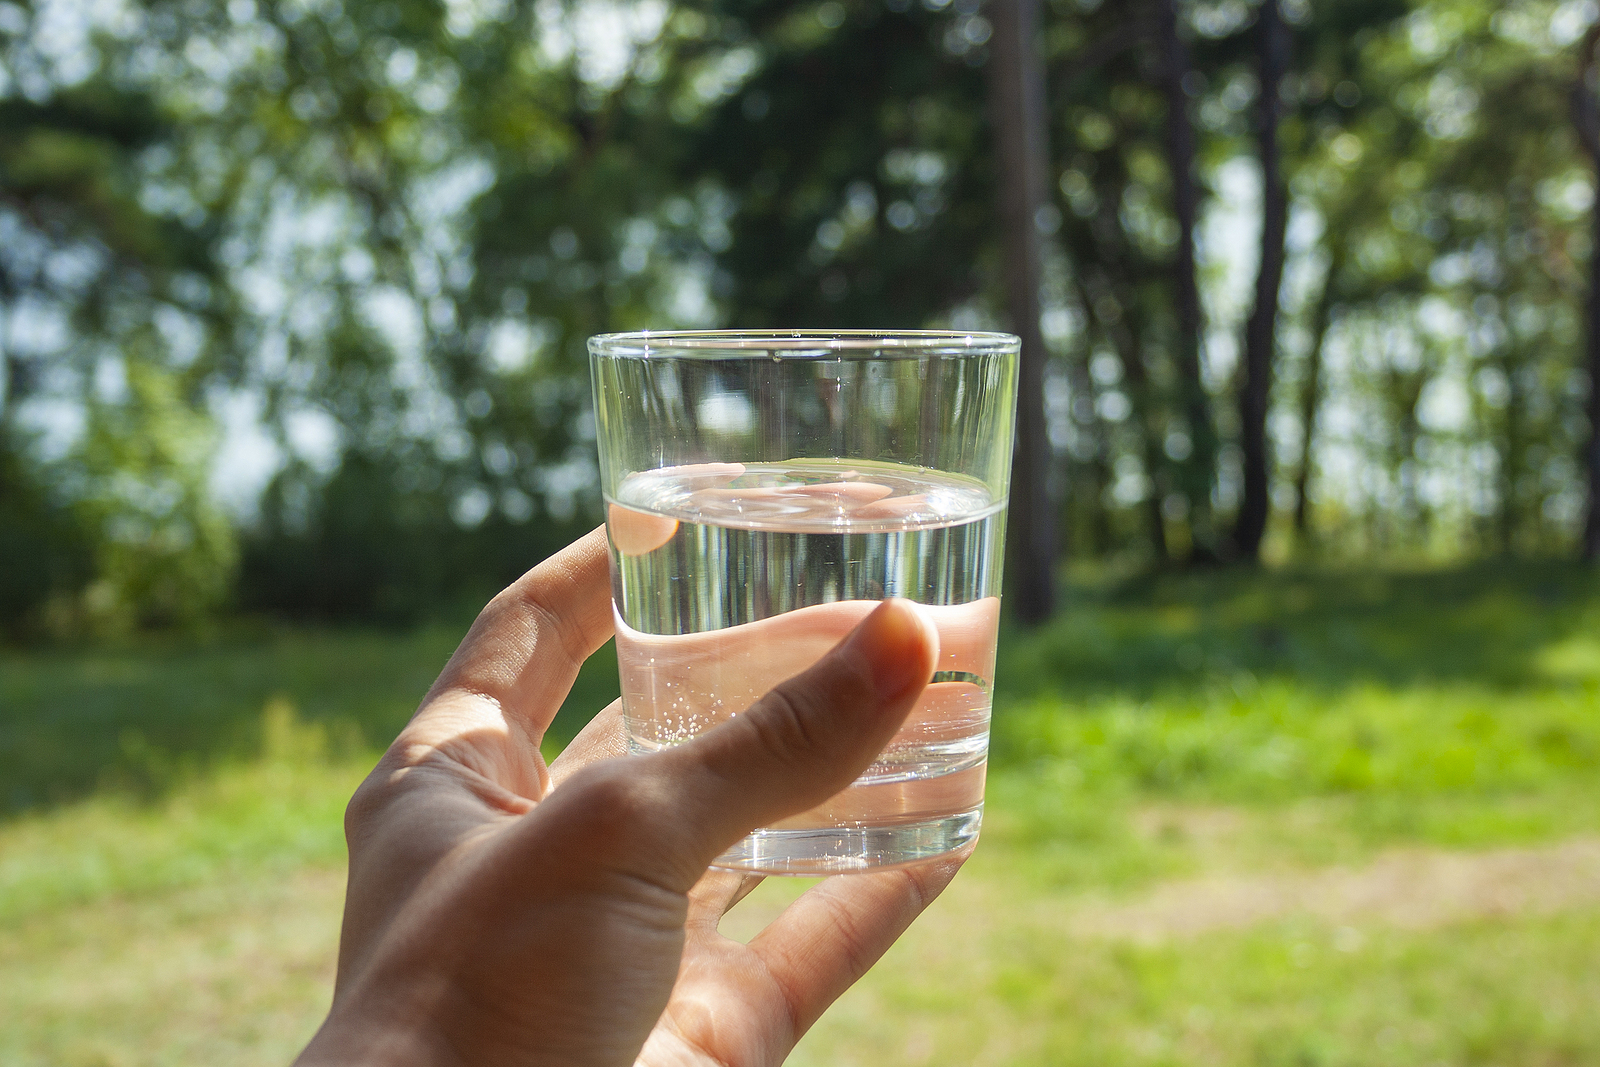 is it safe to drink purified water?